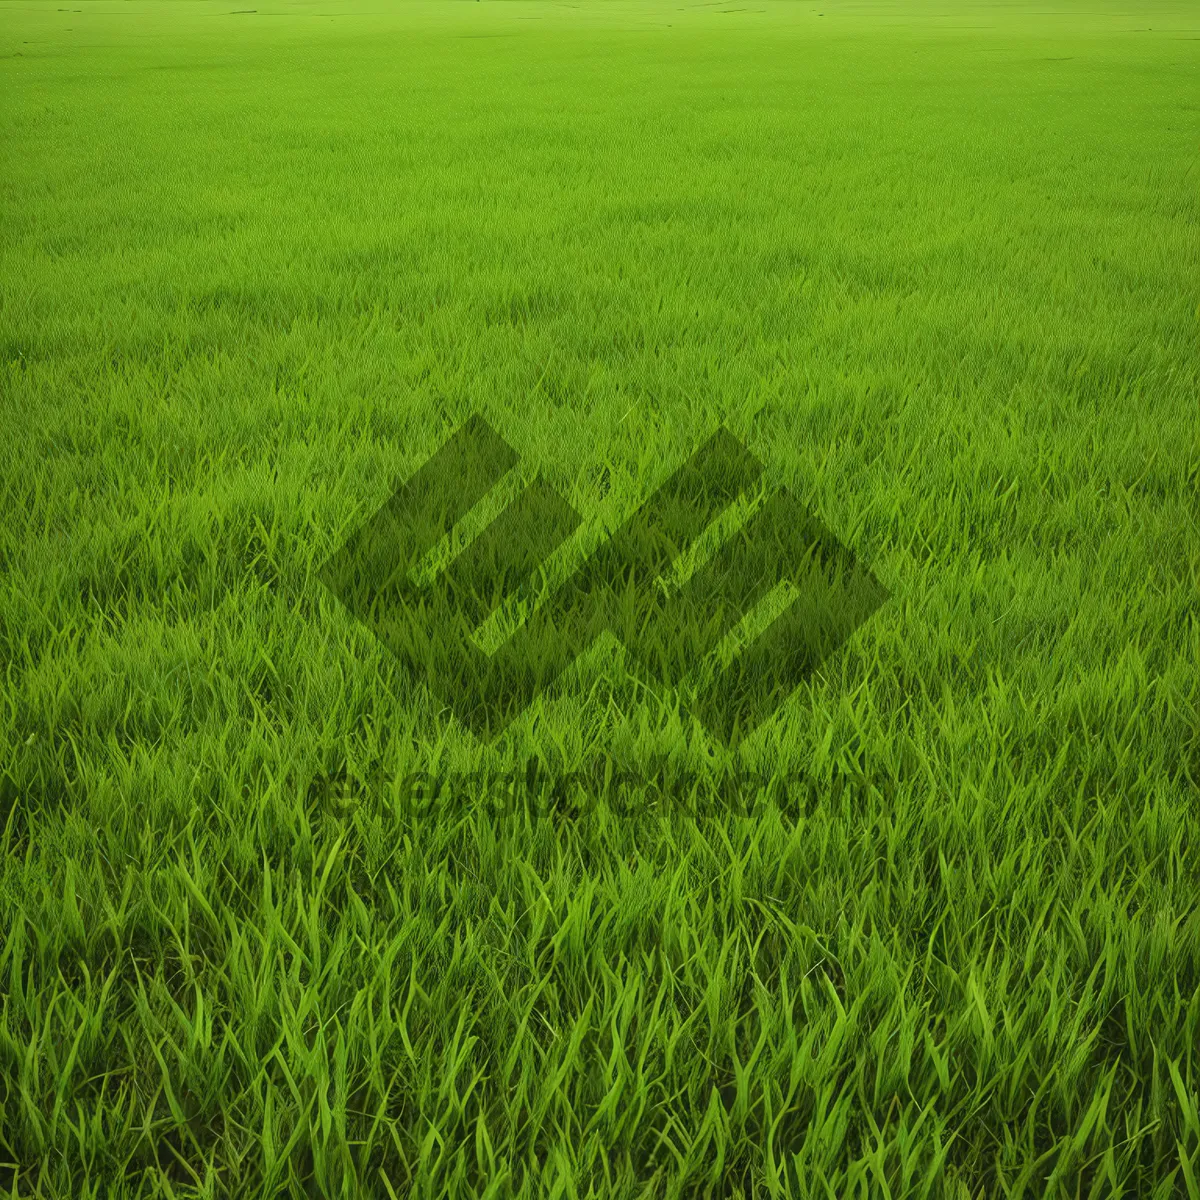 Picture of Vibrant Green Rice Field in Summer Landscape